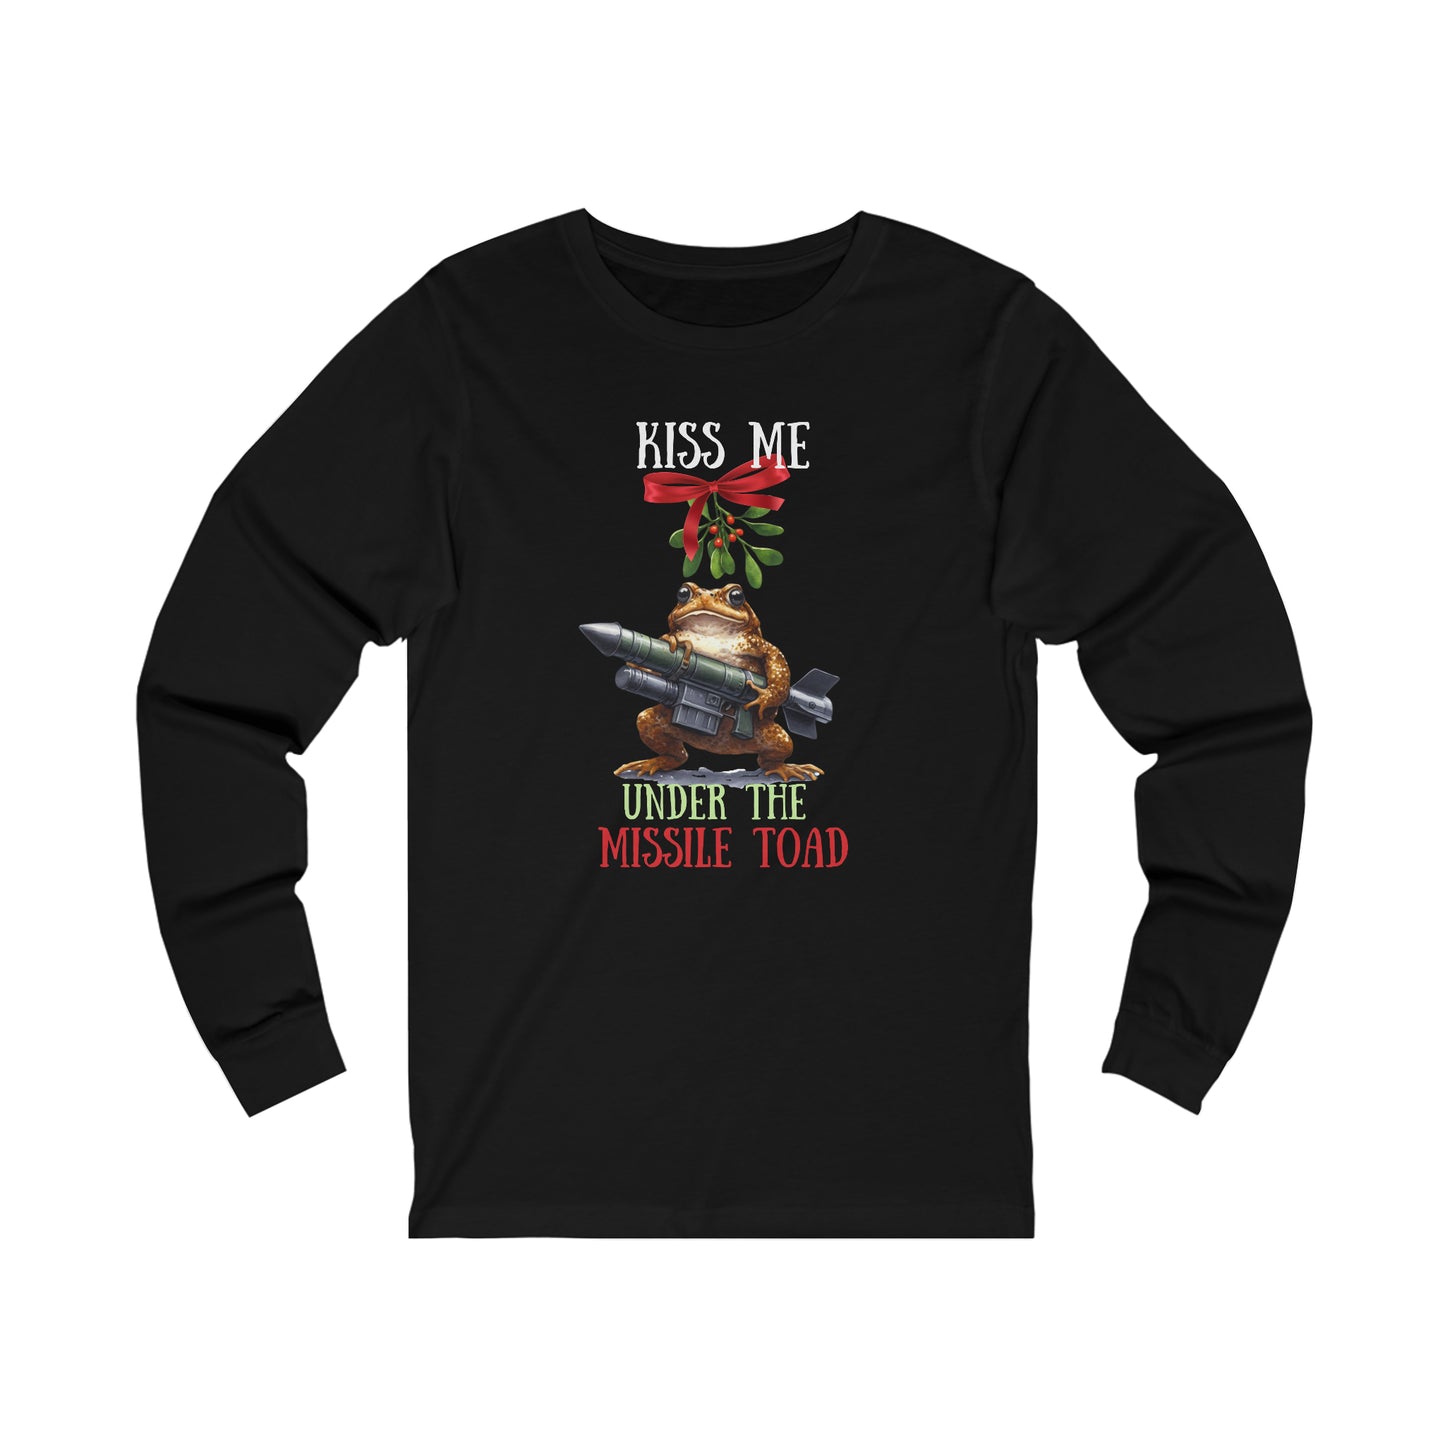 Funny Christmas Shirt Long Sleeve Tee T-shirt kiss me under the missile toad cute frog shirt military dad shirt holiday humor ugly sweater